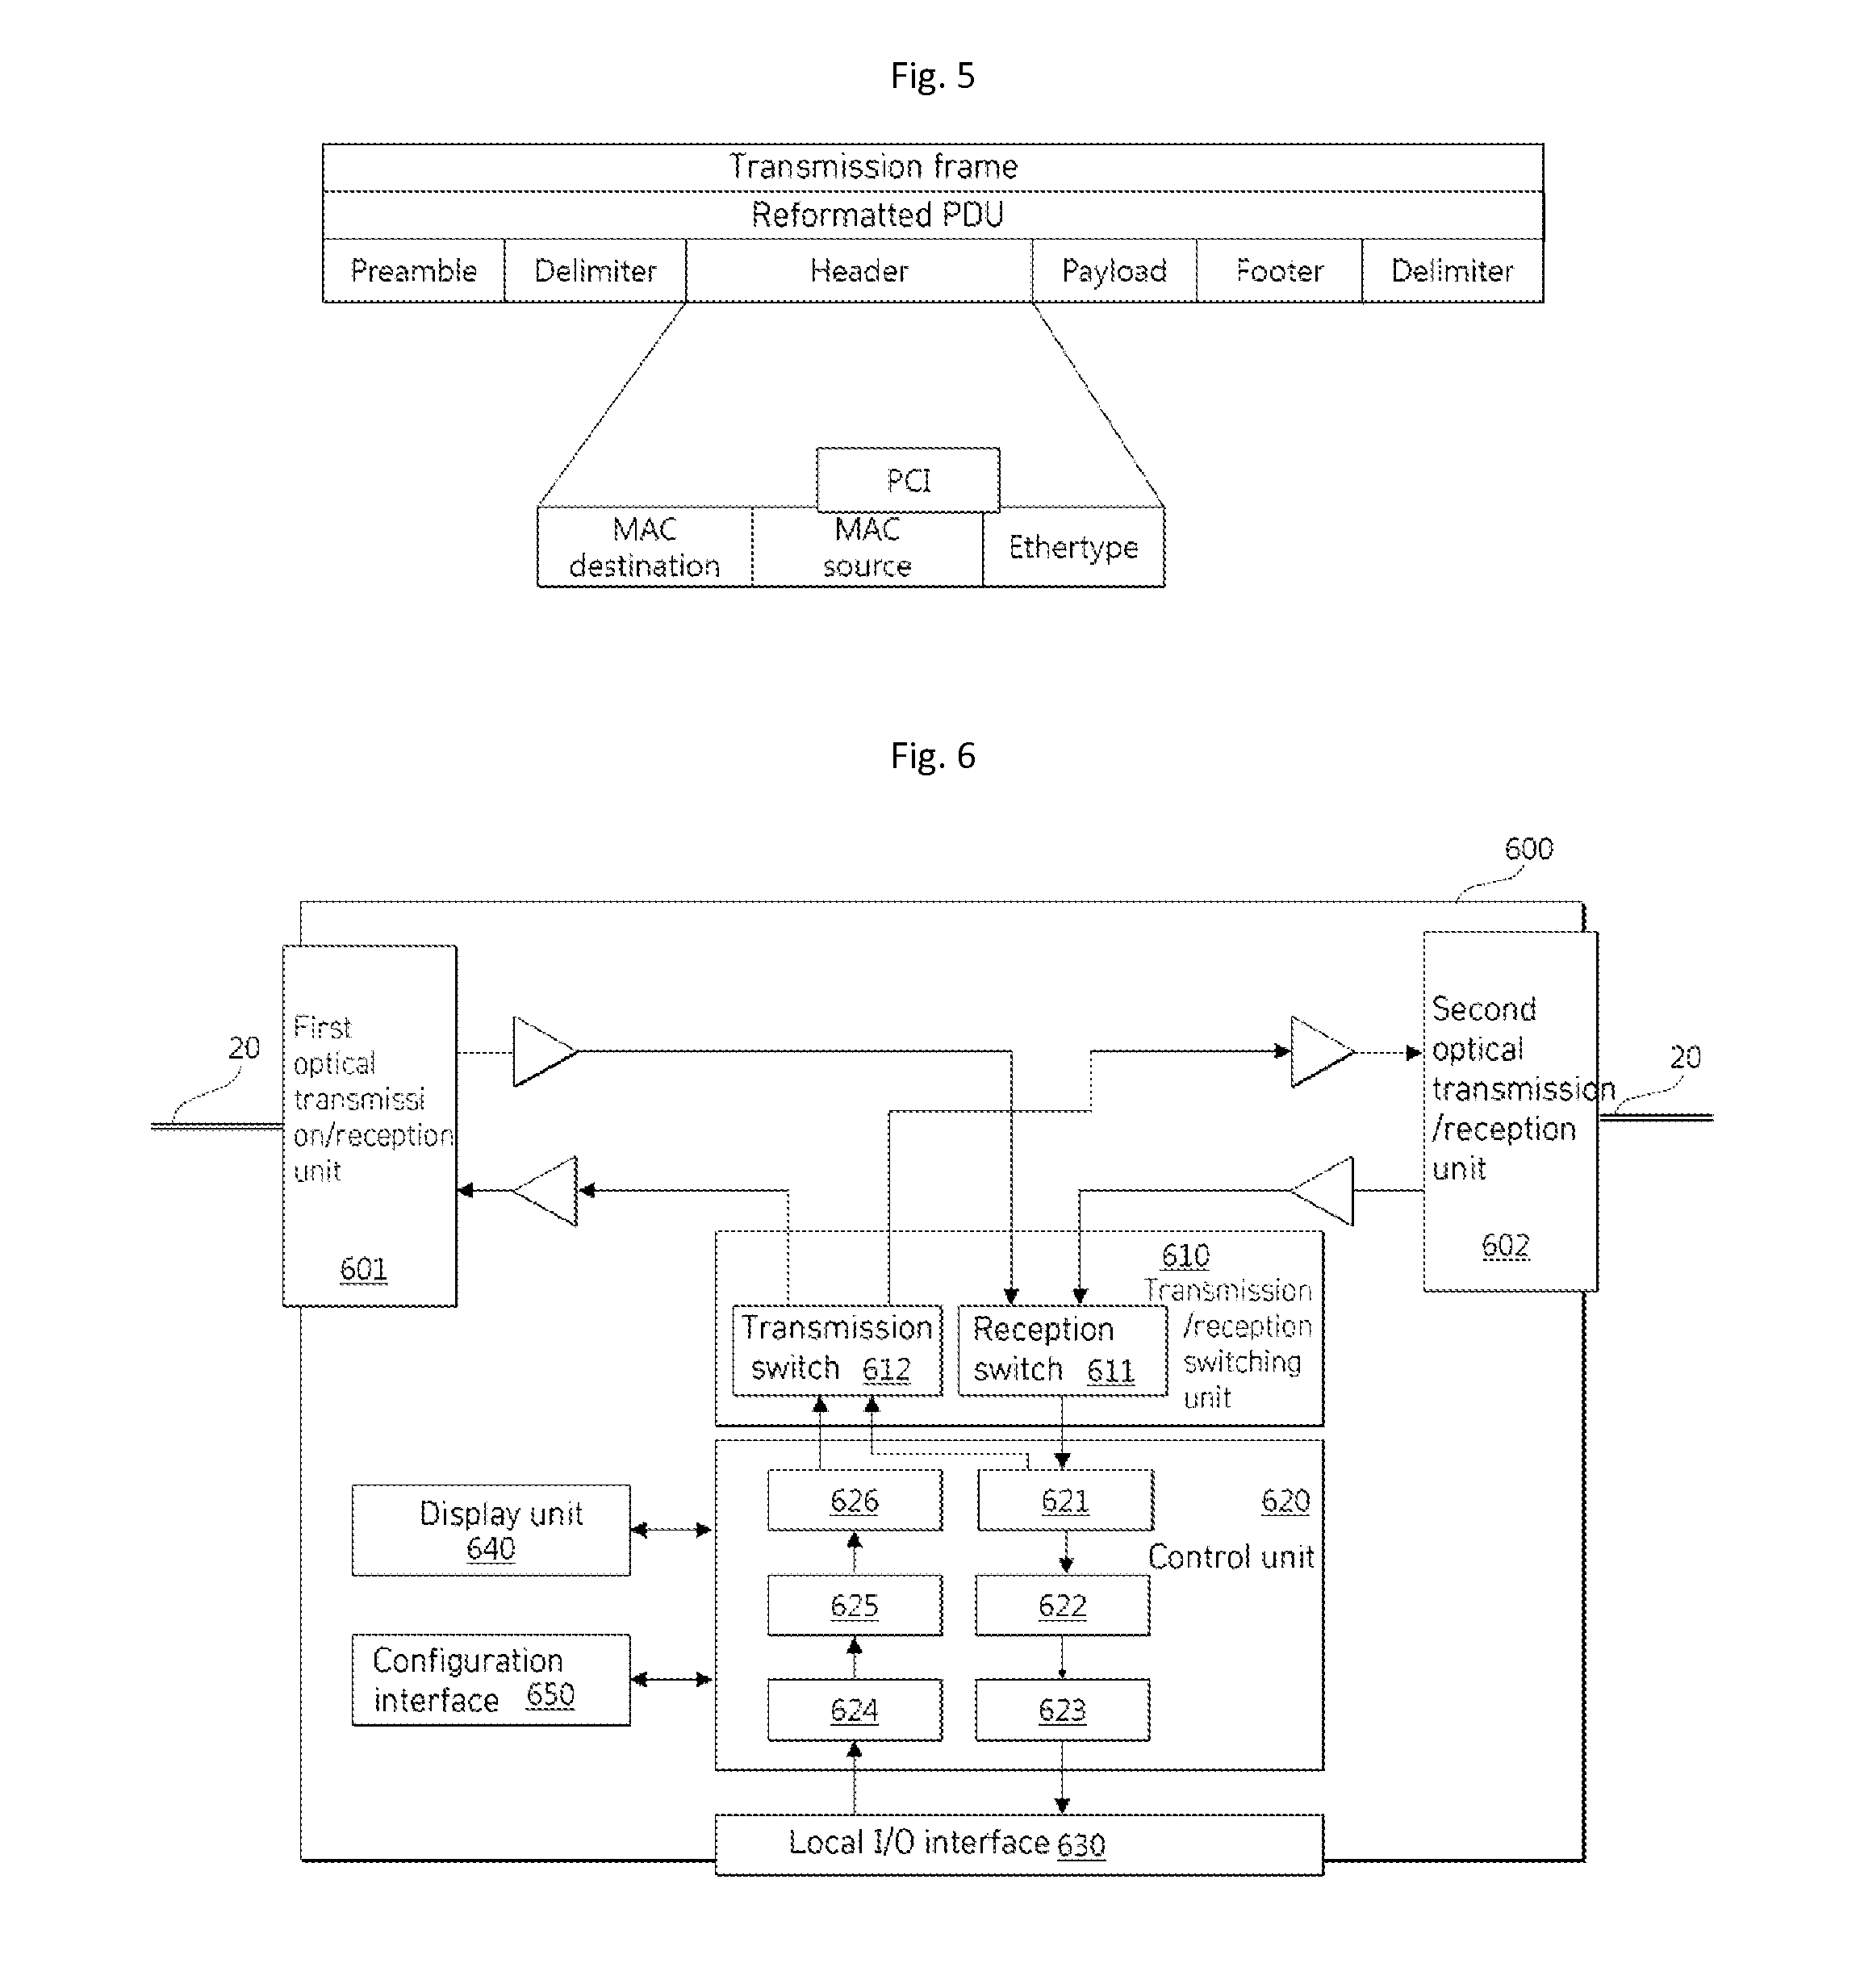 Industrial controller apparatus capable of low error, ultra high-speed serial communication and method for driving same